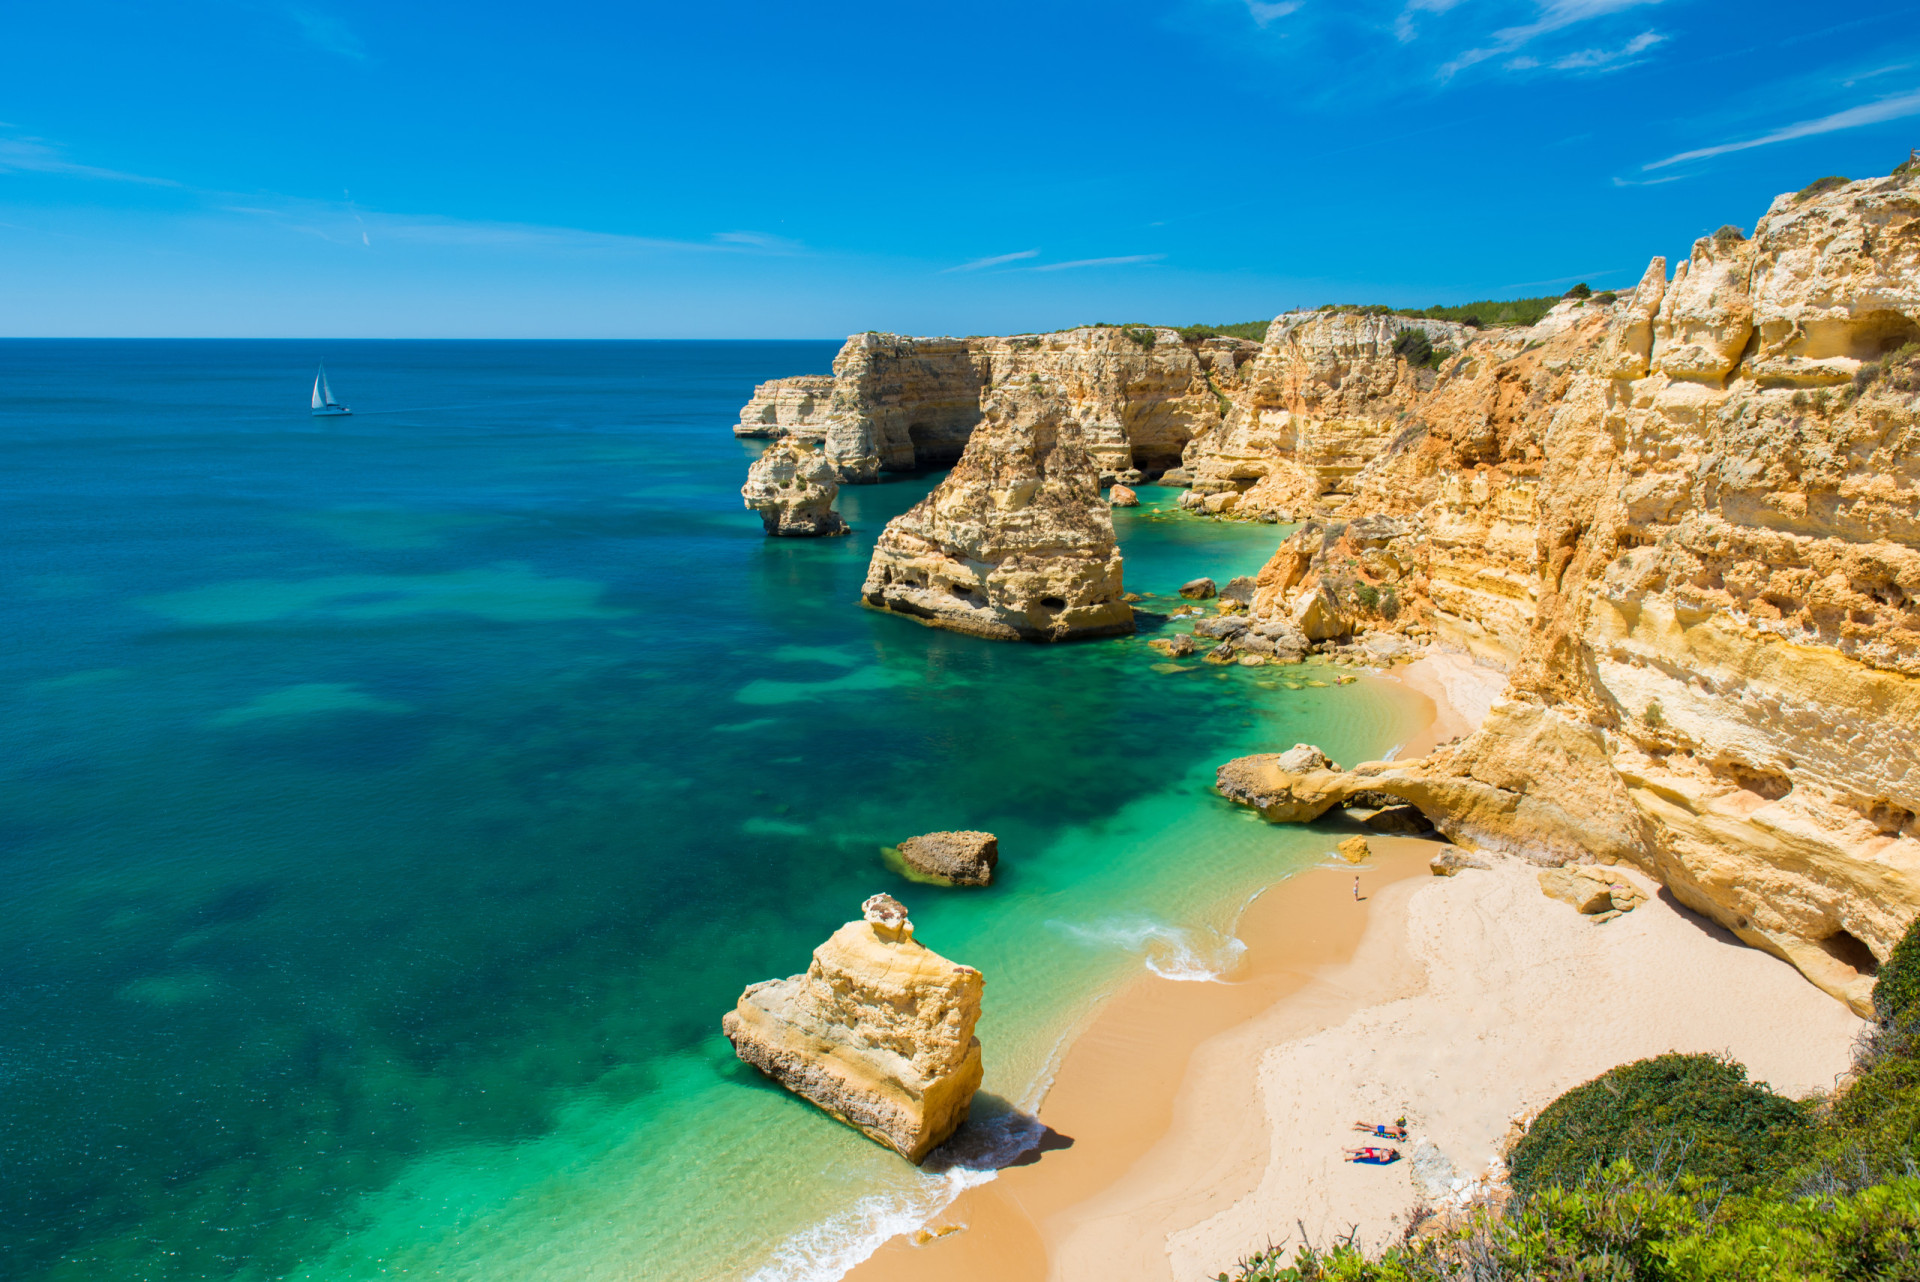 <p>Score: 4.086</p> <p>One of the most emblematic beaches of Portugal, Praia da Marinha is located on the Atlantic Coast in Caramujeira, Algarve.</p><p>You may also like:<a href="https://www.starsinsider.com/n/184478?utm_source=msn.com&utm_medium=display&utm_campaign=referral_description&utm_content=697708en-en_selected"> The most picturesque mountain towns in America</a></p>